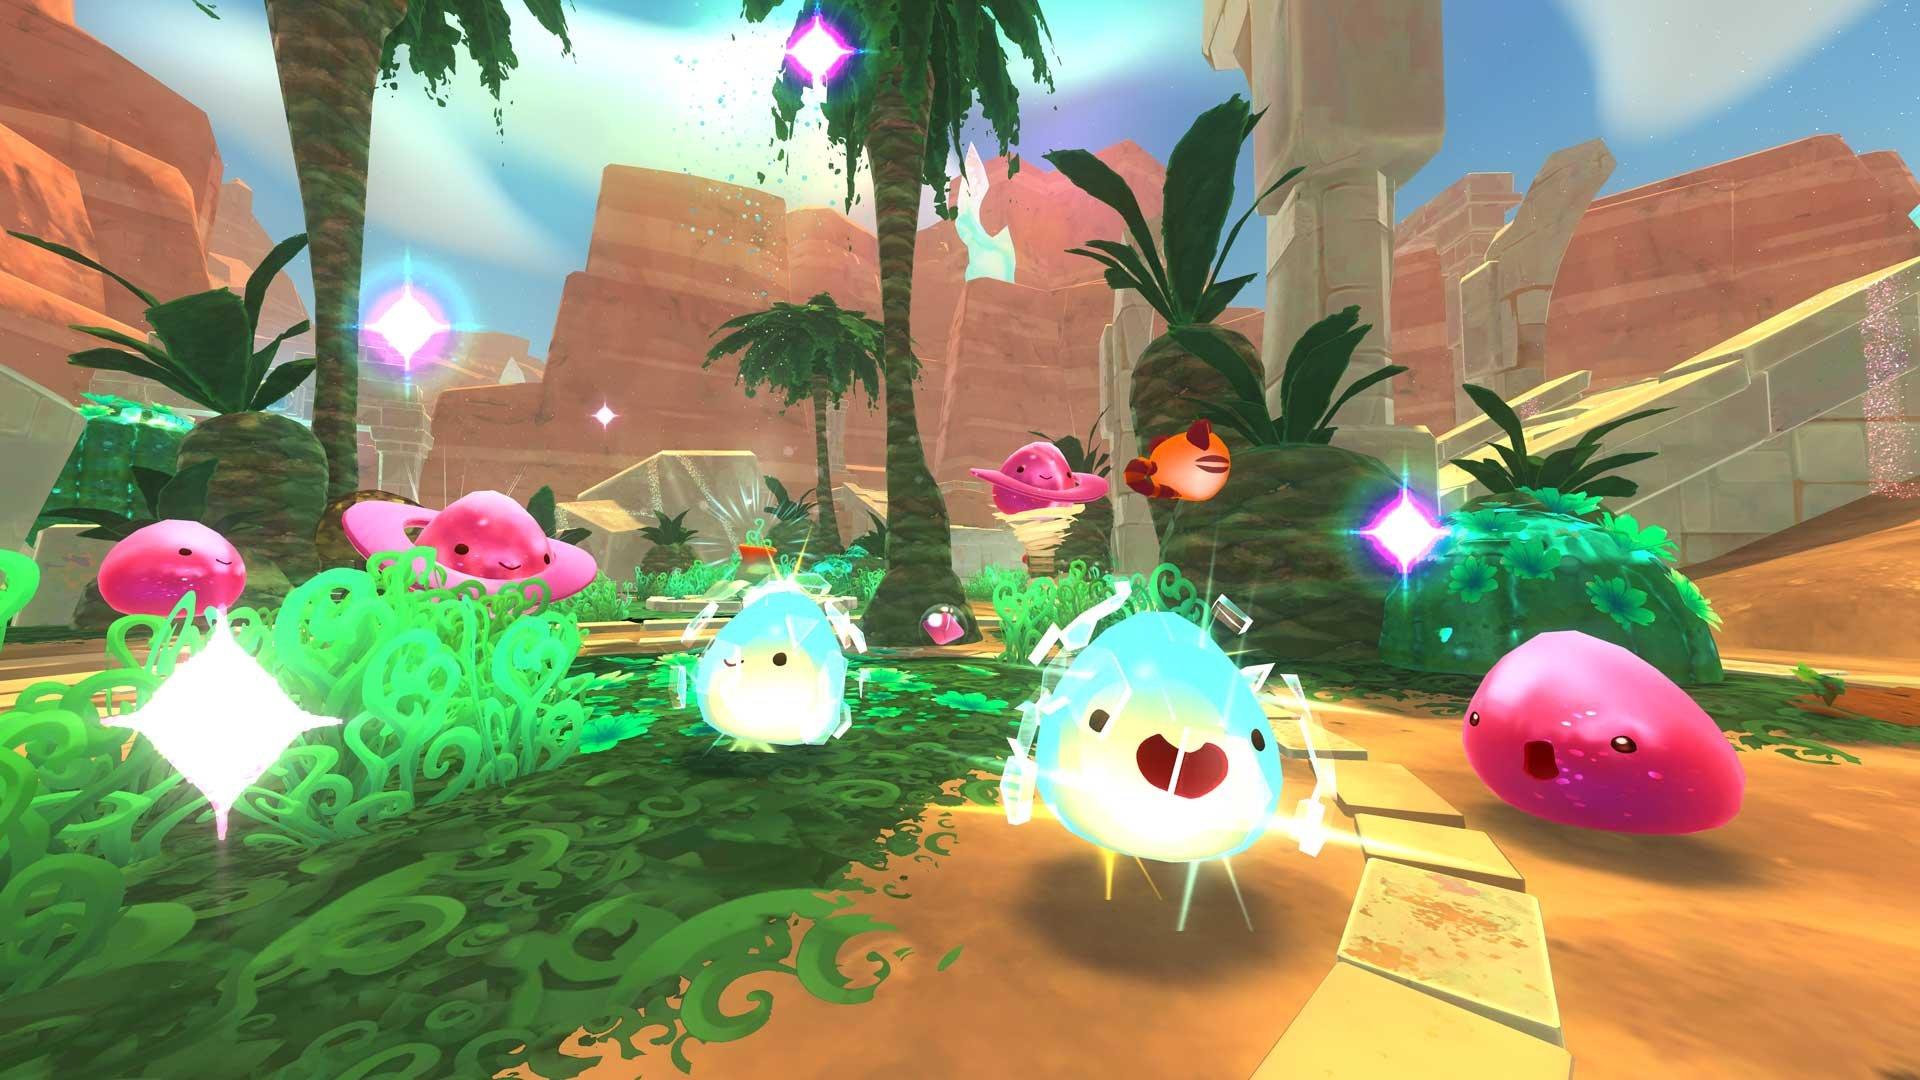 Will Slime Rancher 2 be on PlayStation 4 or PlayStation 5 consoles